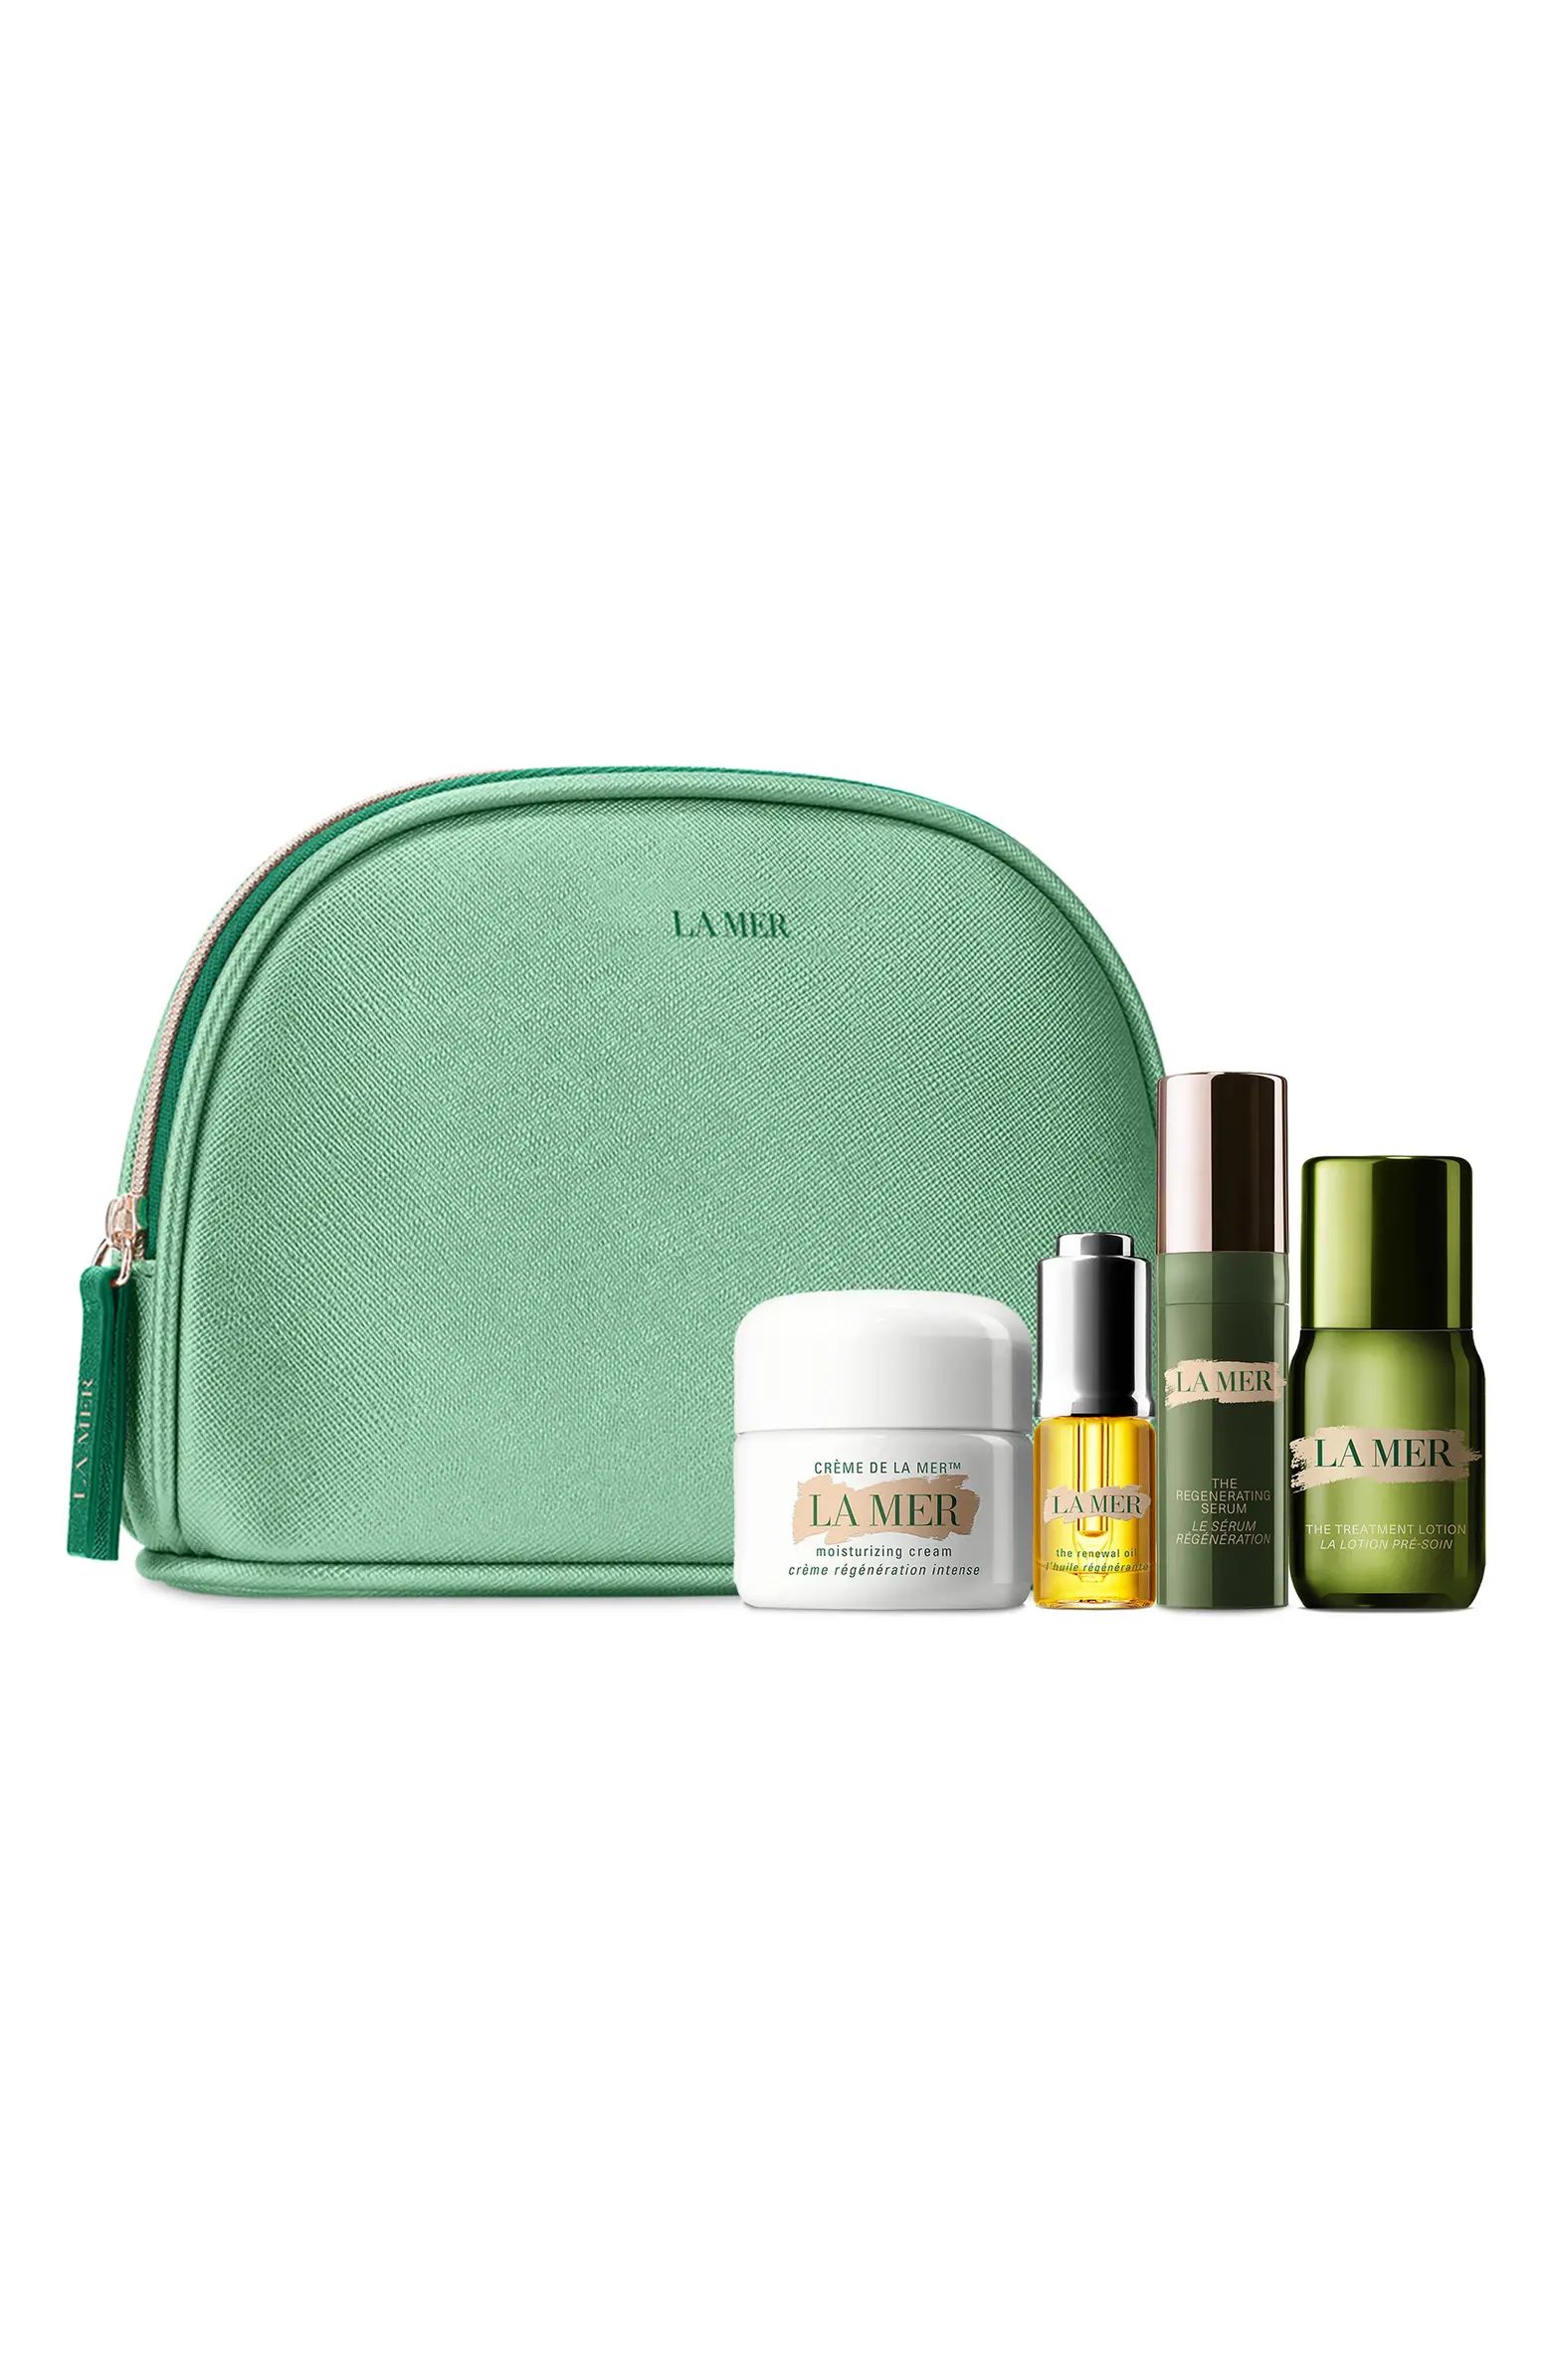 La Mer The Glowing Renewal Collection Set (Nordstrom Exclusive) USD $187 Value | Nordstrom | Nordstrom